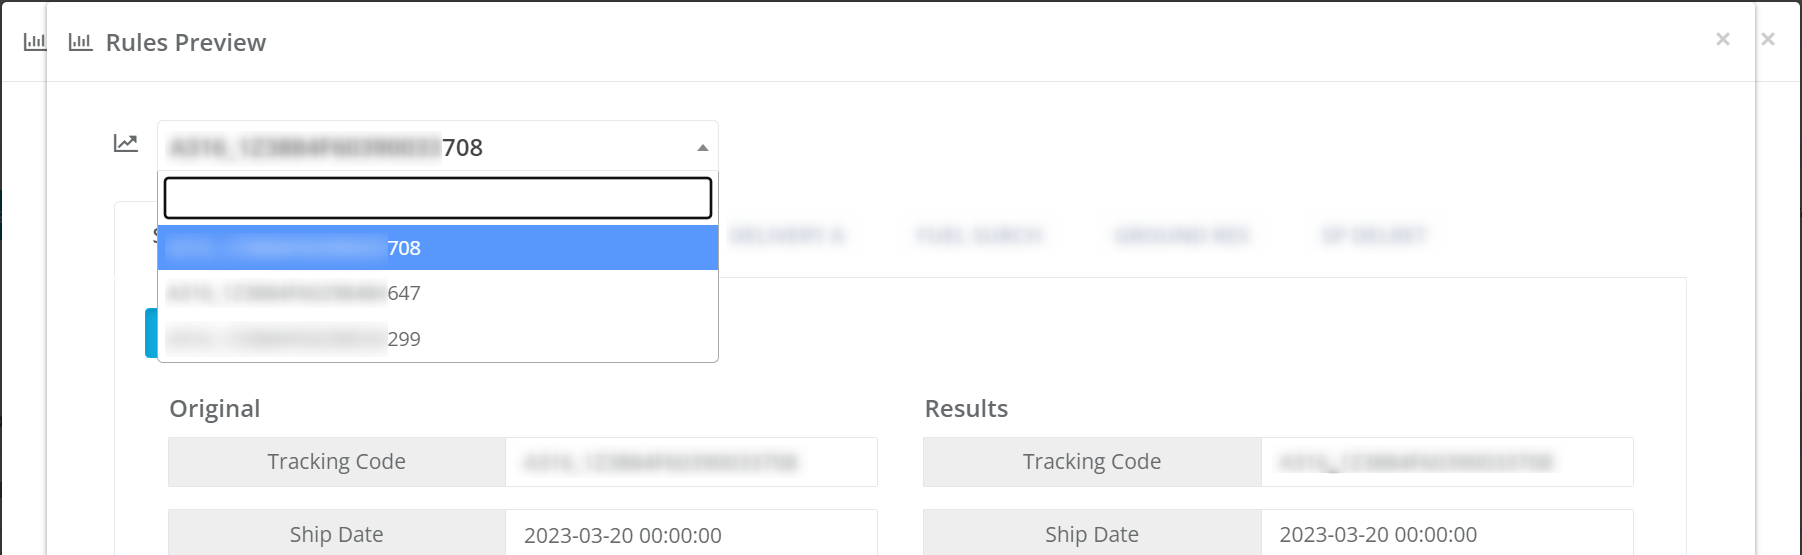 Multiple Tracking Numbers for Rules Preview